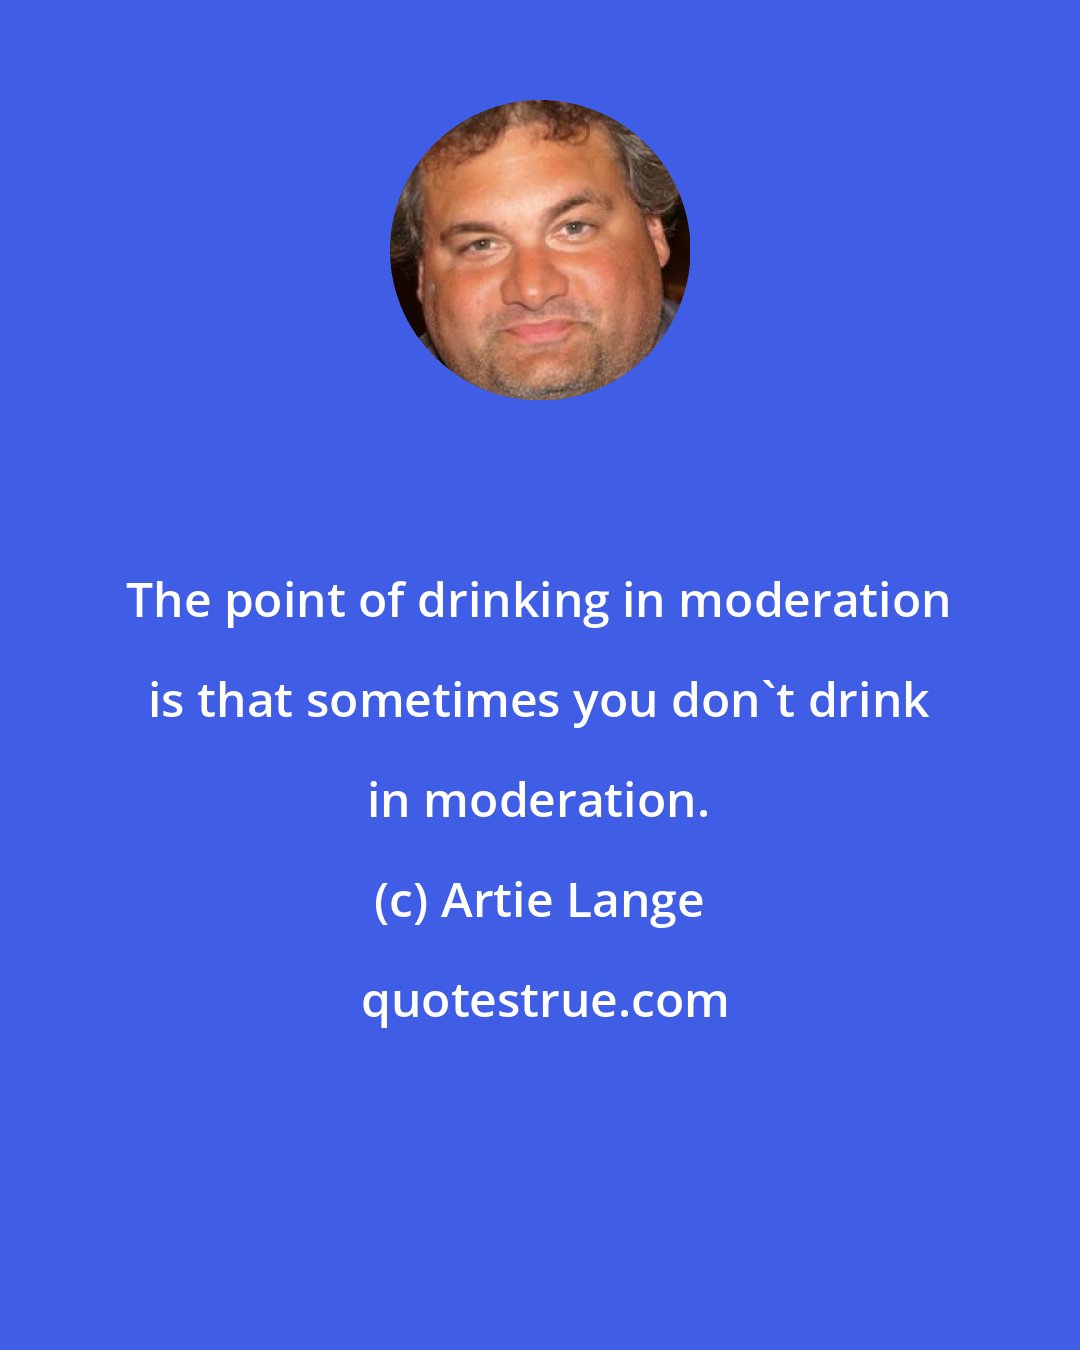 Artie Lange: The point of drinking in moderation is that sometimes you don't drink in moderation.